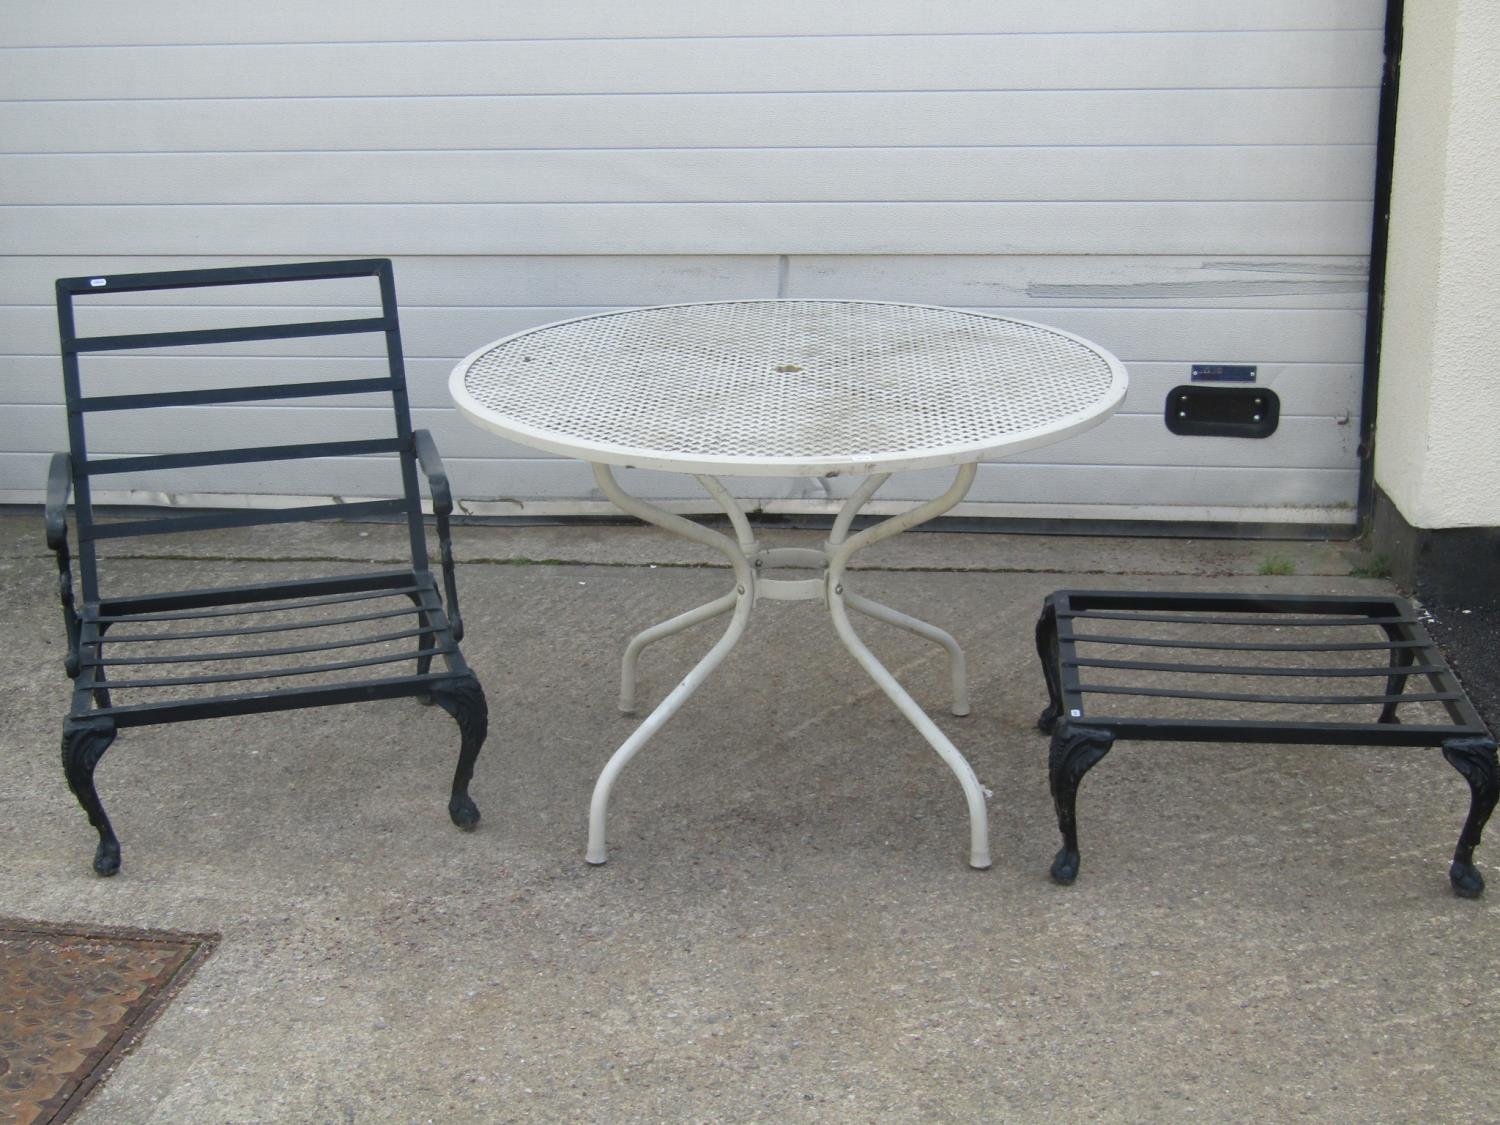 A painted cast alloy circular garden terrace table with lattice top 105 cm diameter, together with a